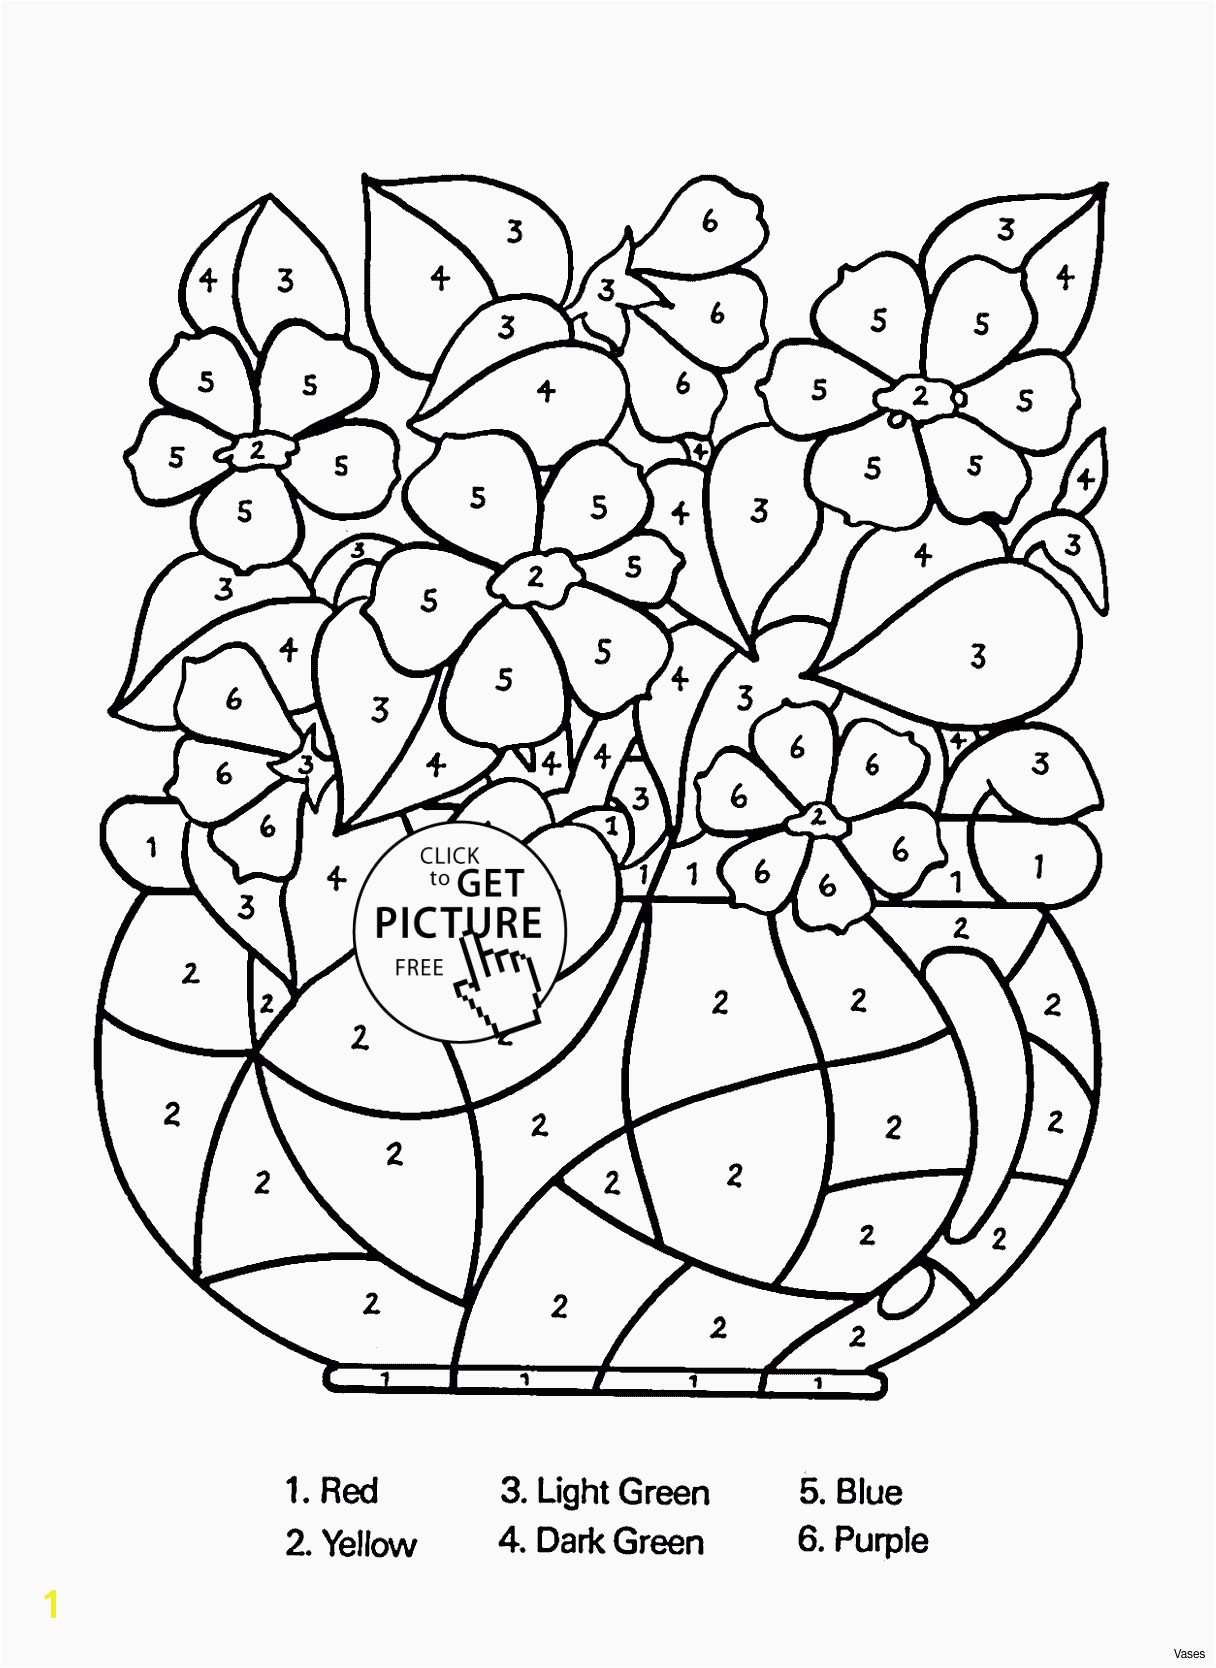 Flowers Printable Coloring Pages Free Printable Flower Coloring Pages Best Vases Flower Vase